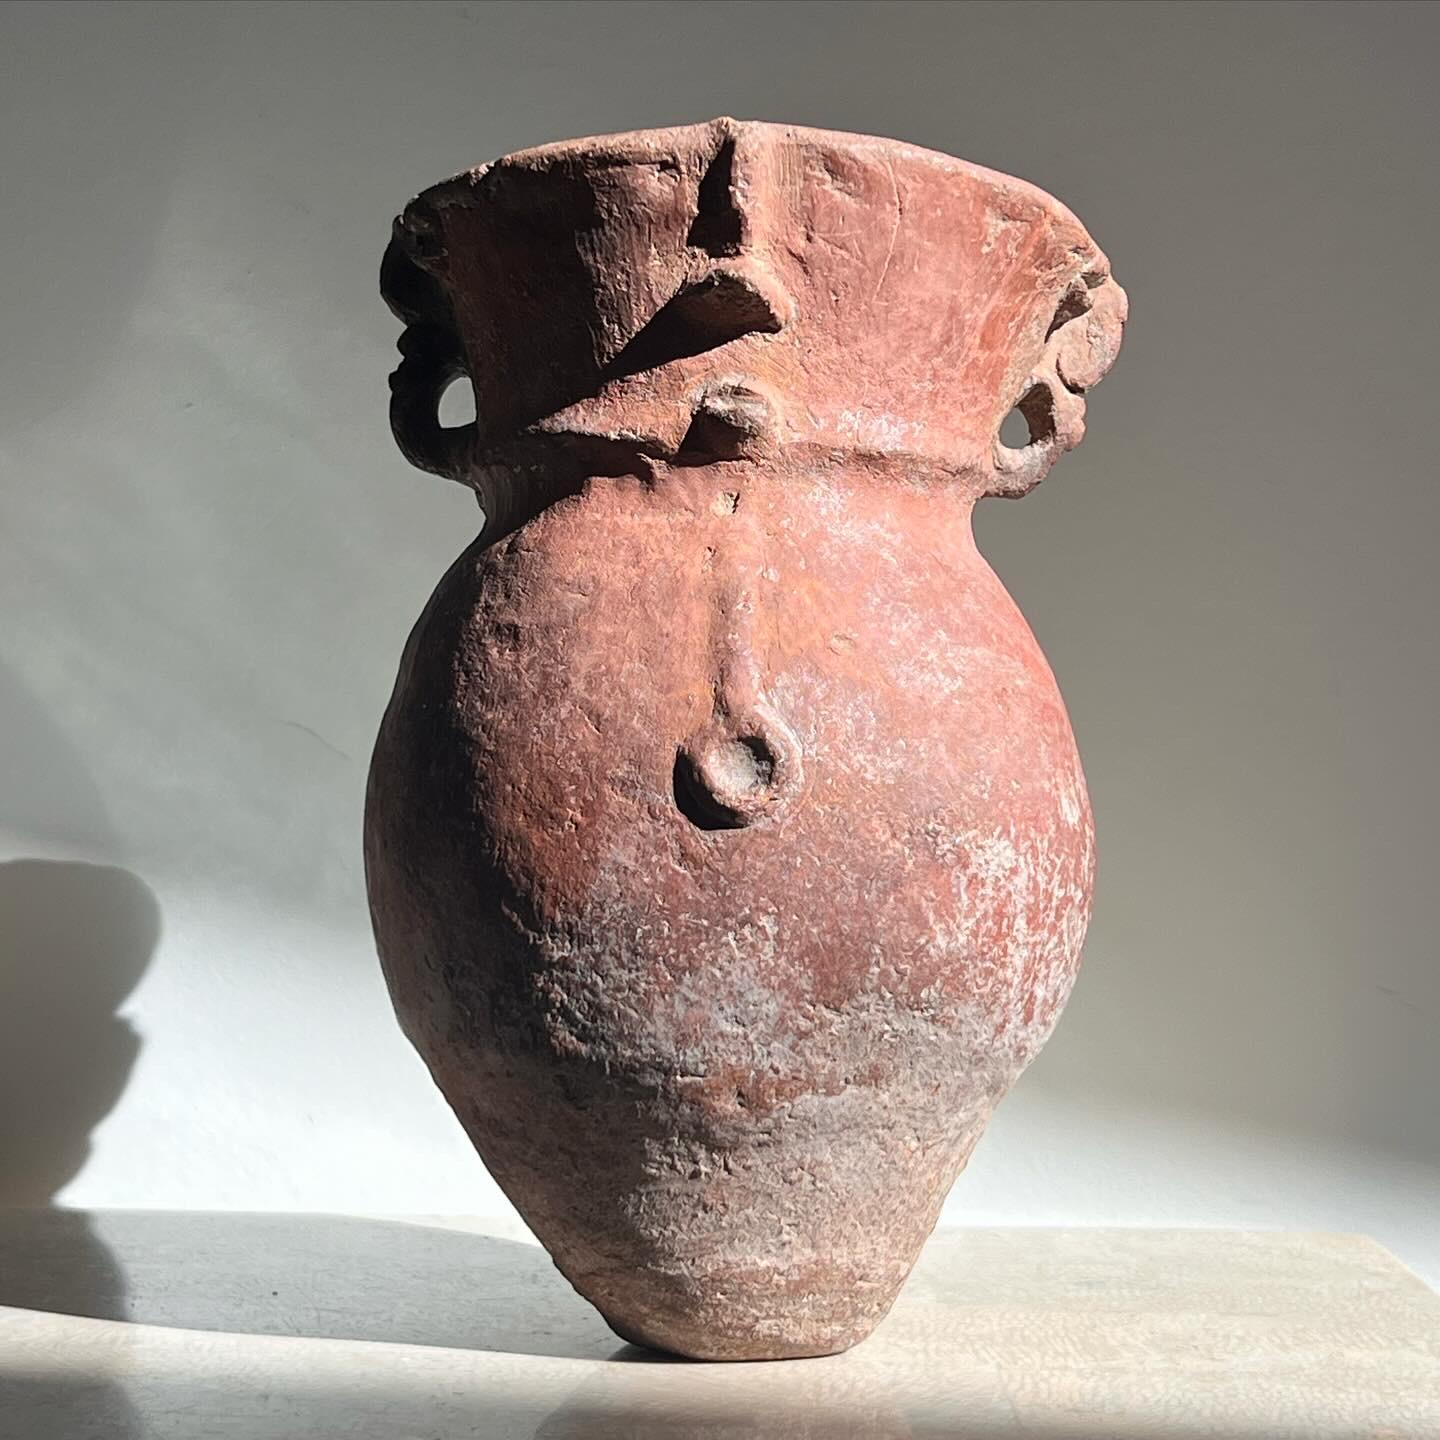 A Pre-Columbian pottery vessel. There are hand-sculpted vestiges of a face reminiscent of early figurative efforts. Patina includes traces of red cinnabar and mineral deposits, attesting to the item’s age. When wetted, there is an exquisitely